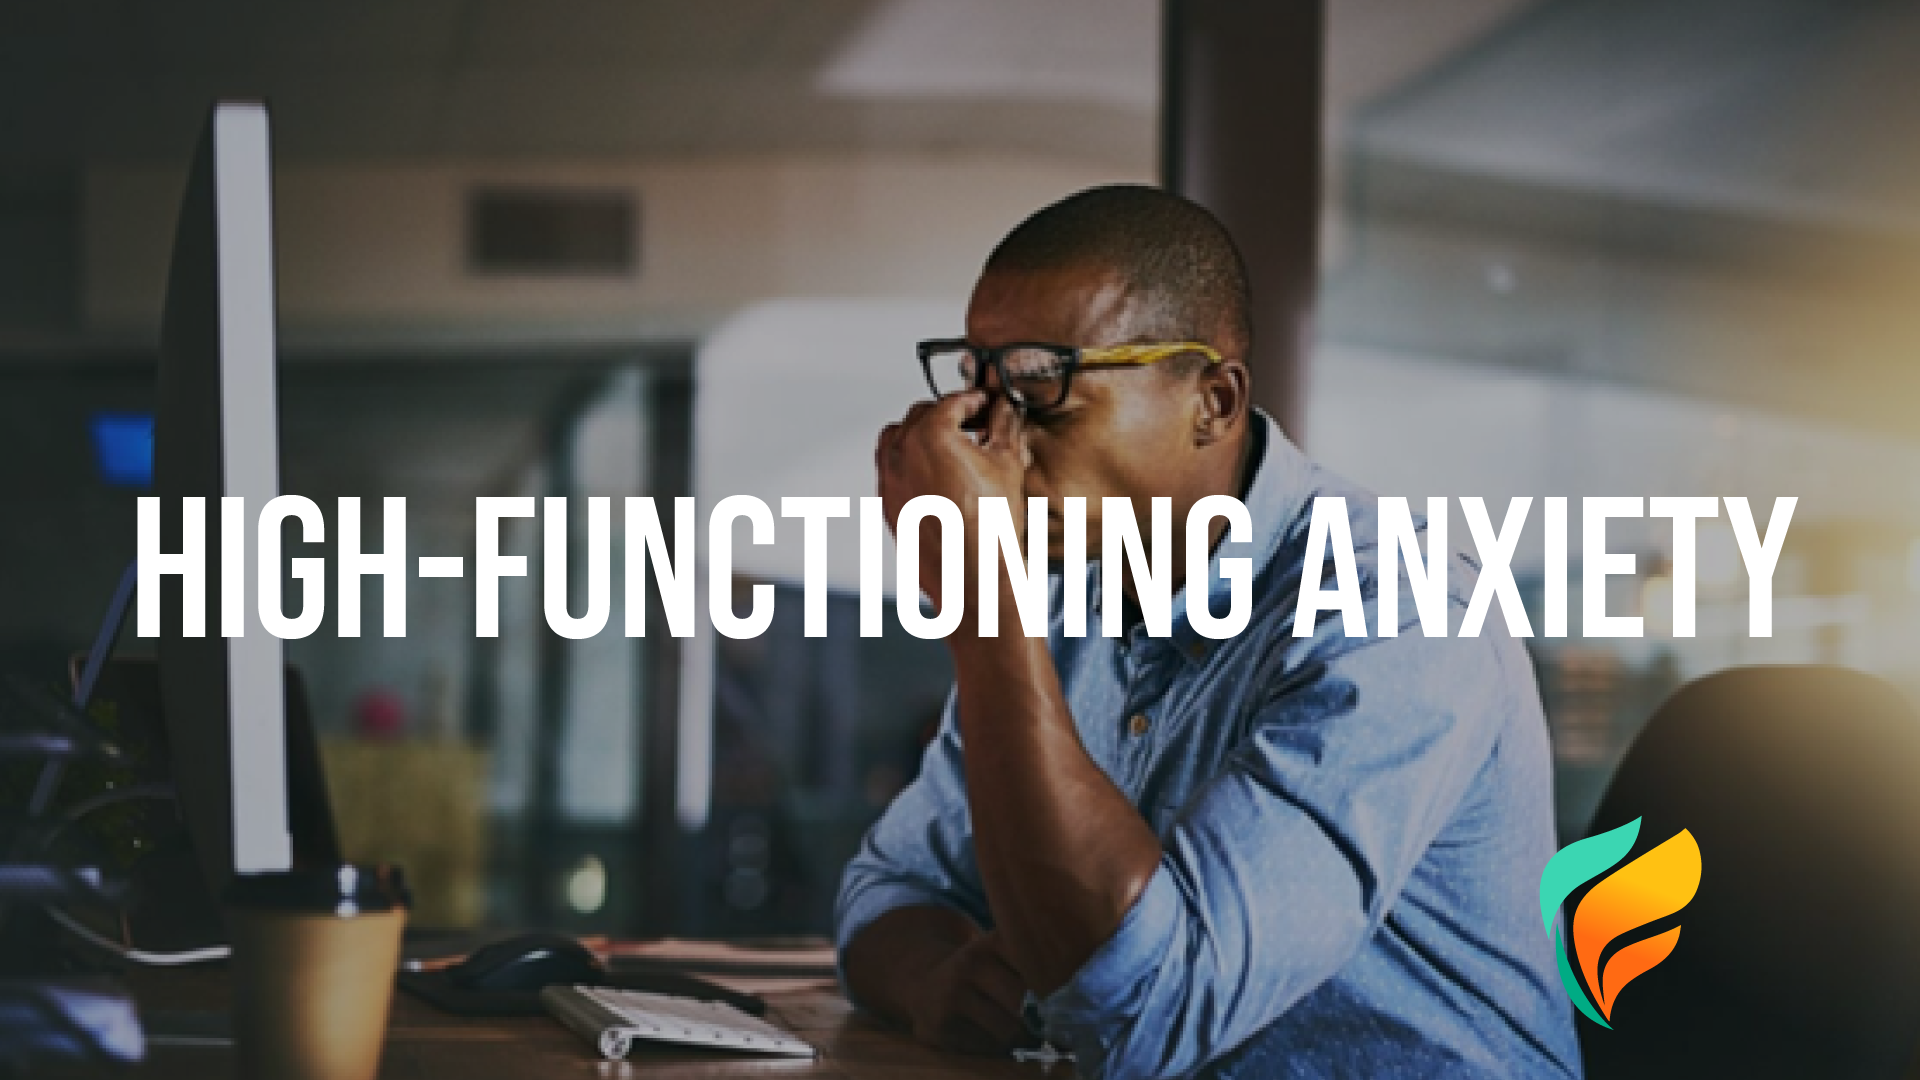 What is High-Functioning Anxiety?